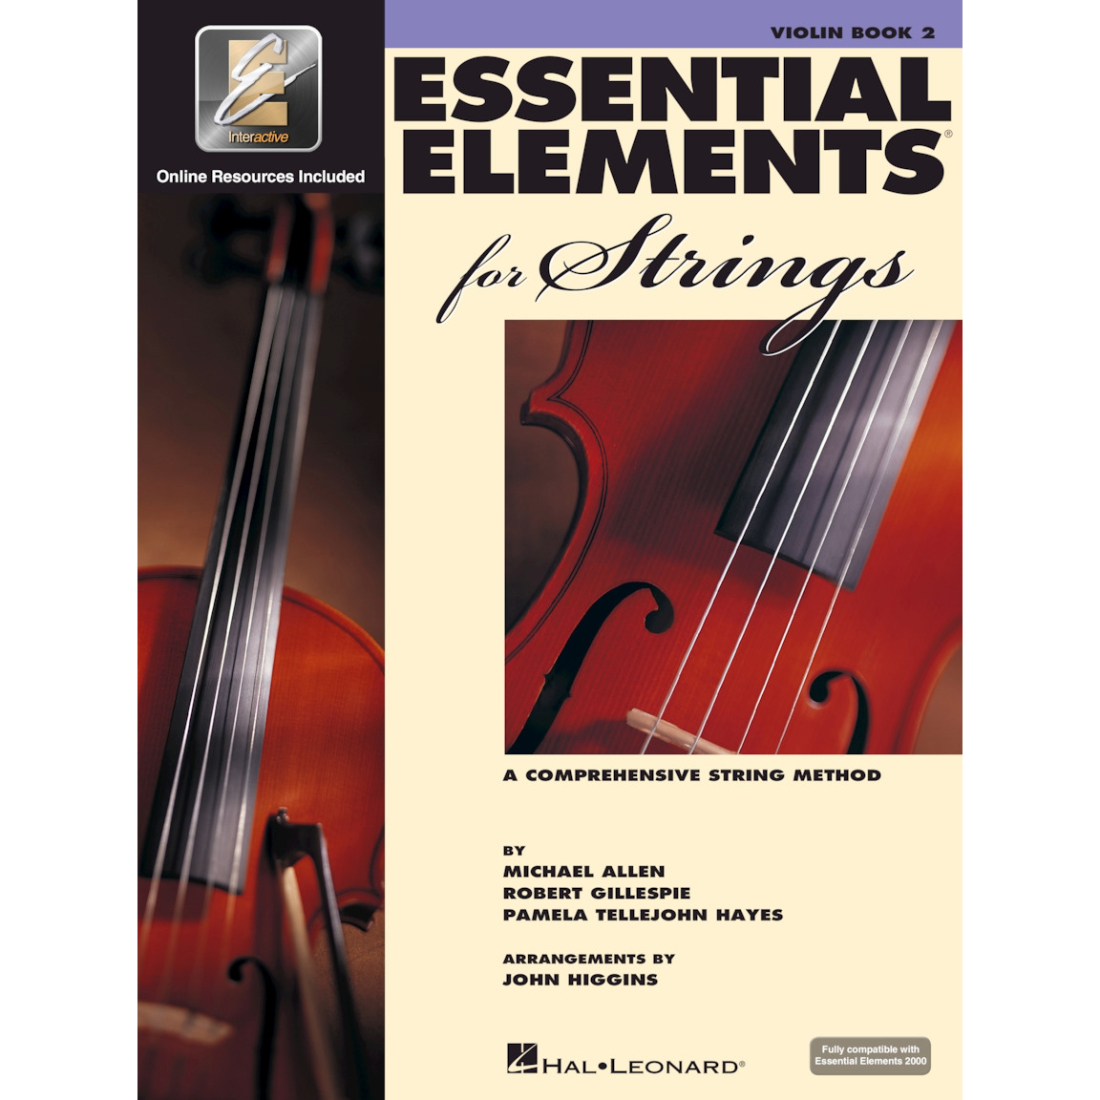 White cover with images of instruments, titled essential elements for strings book 2